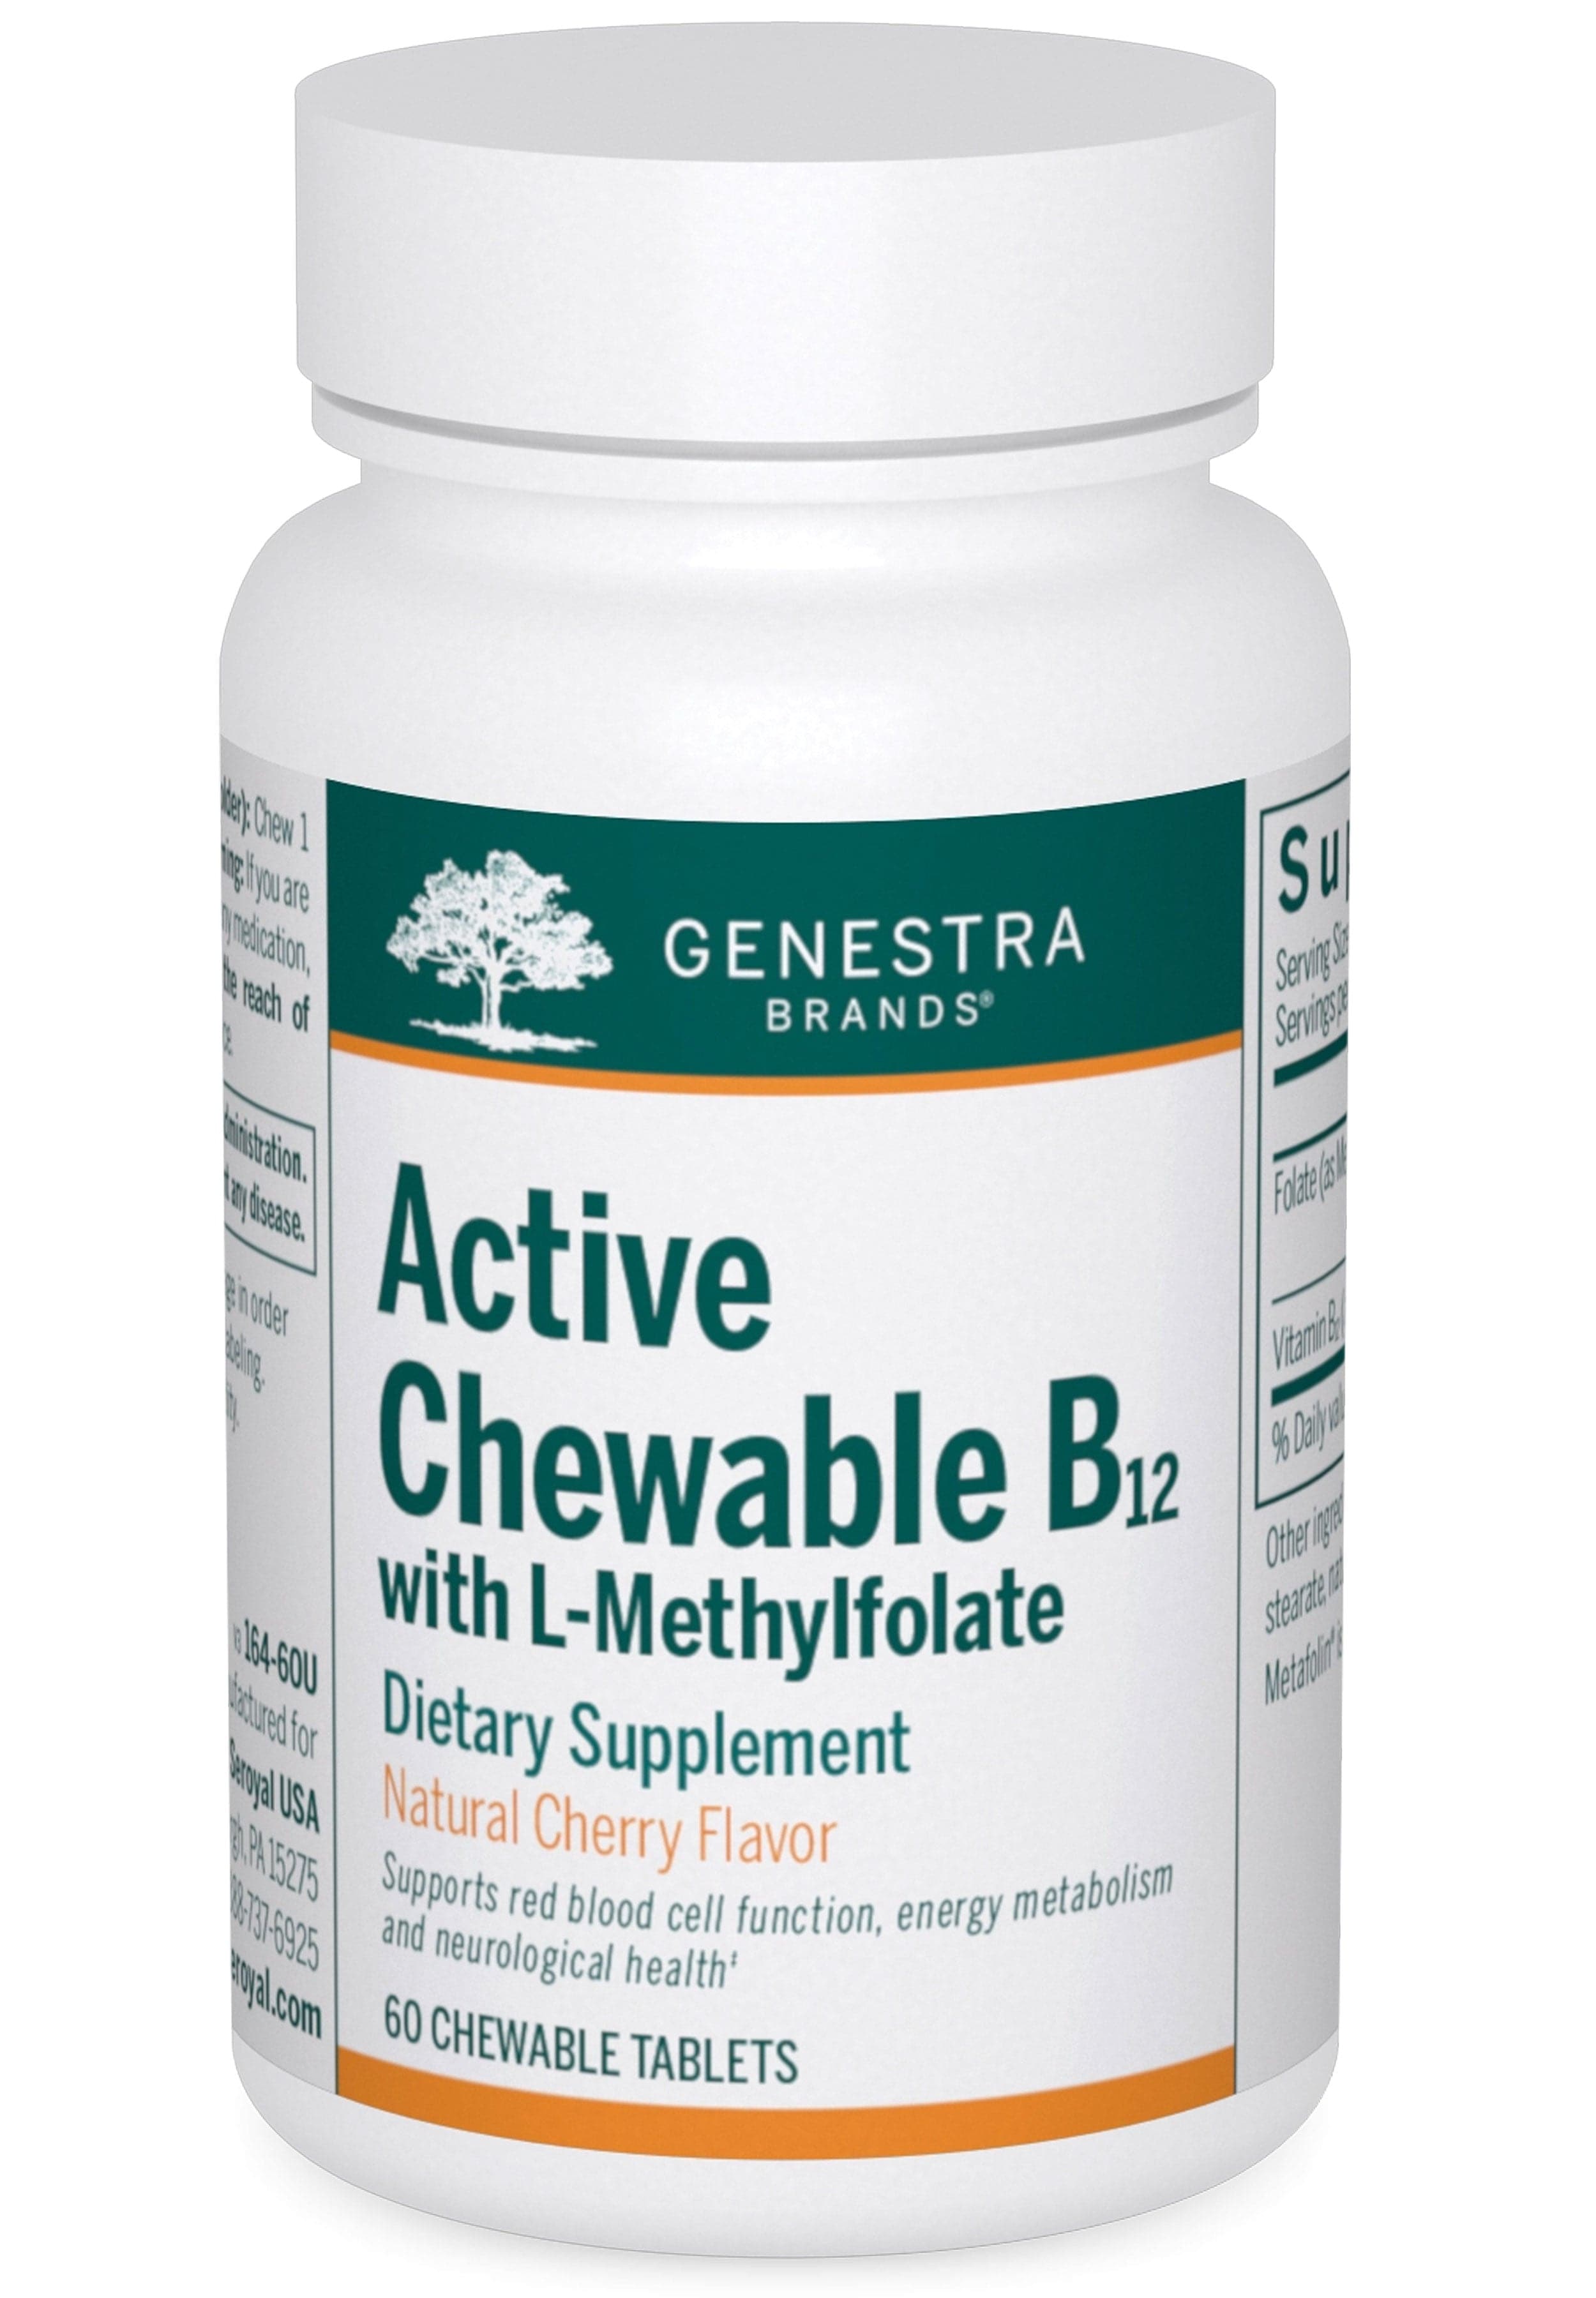 Genestra Brands Active Chewable B12 with L-Methylfolate